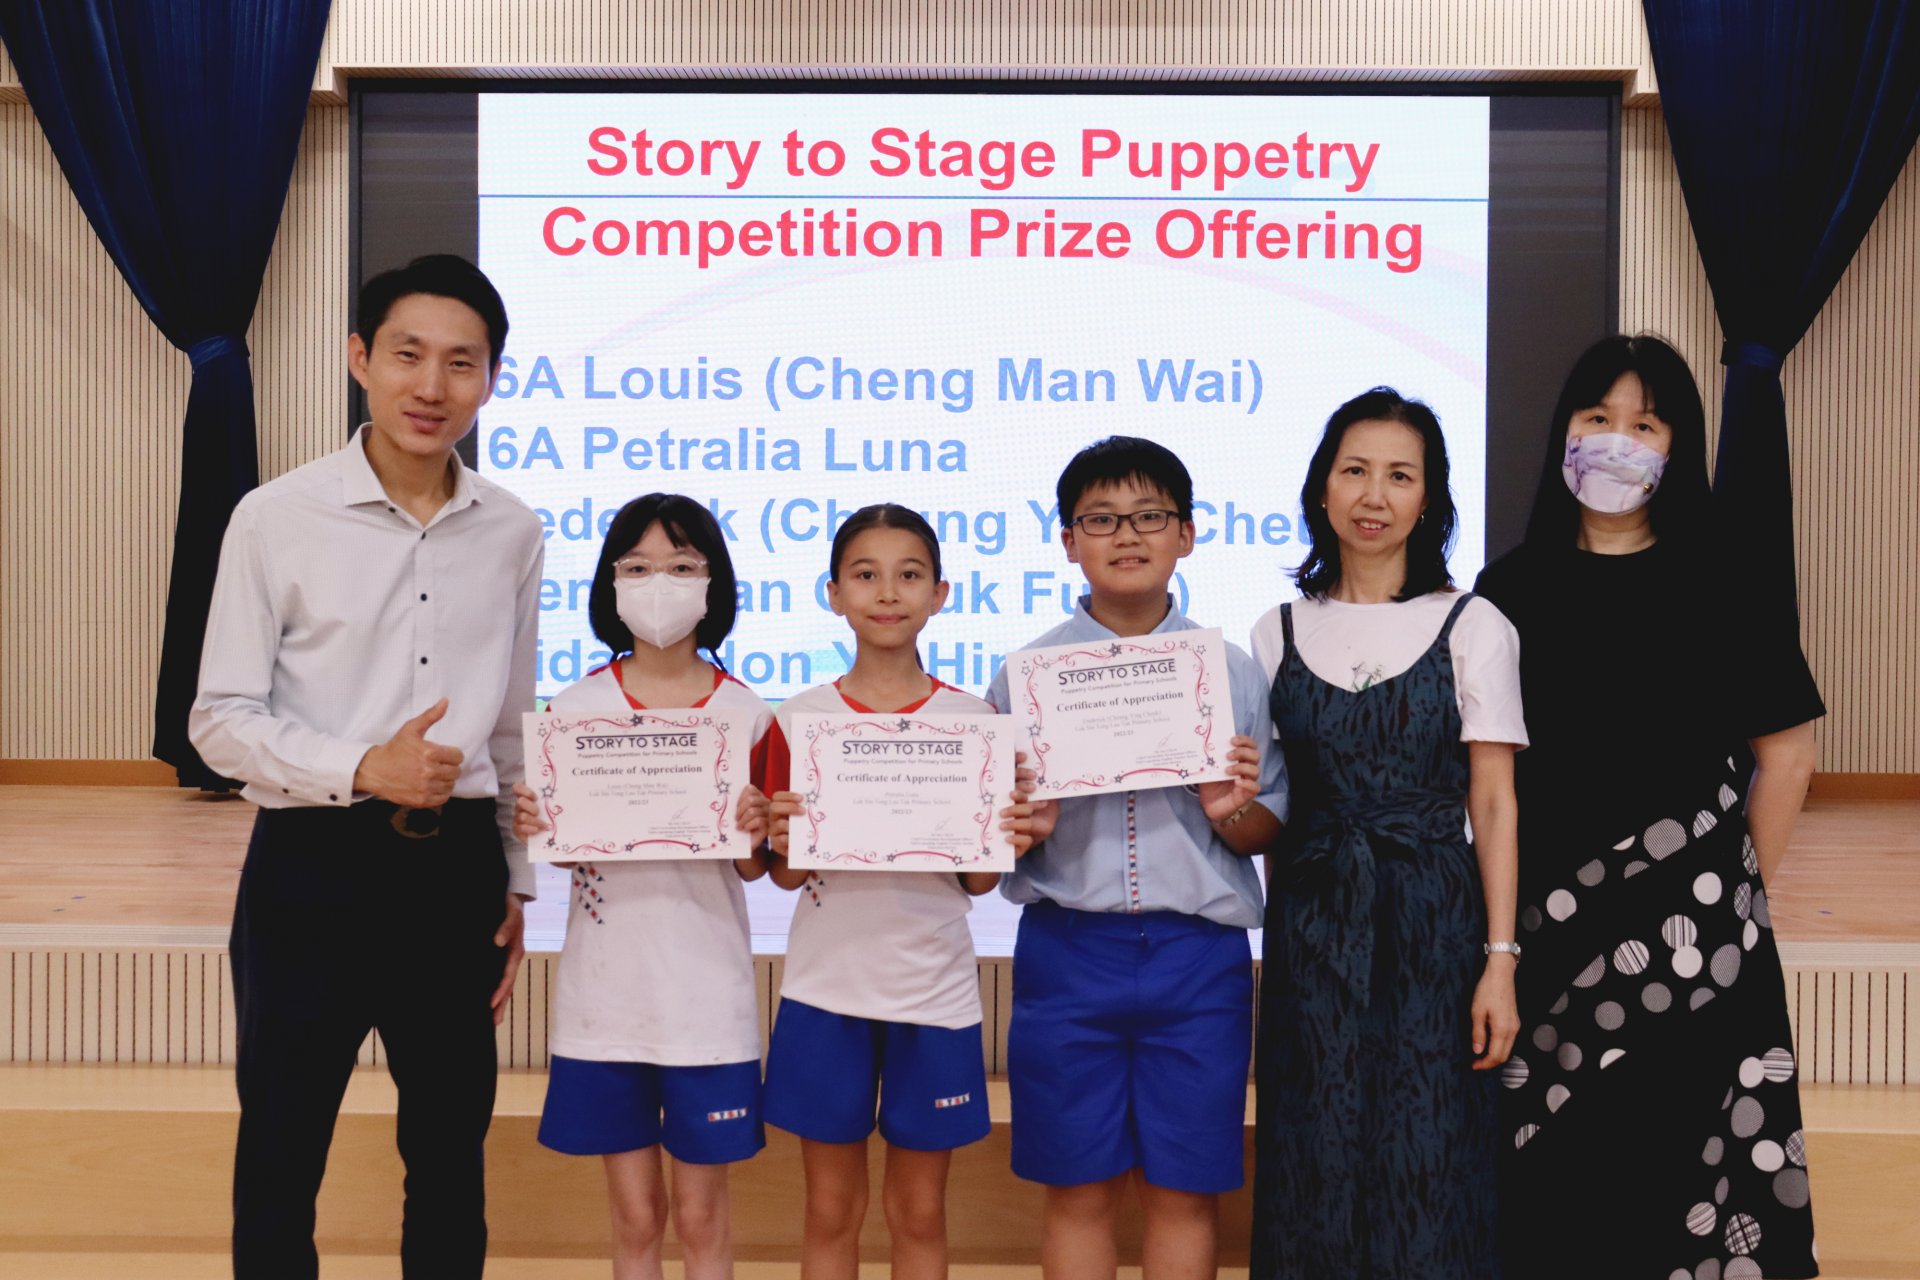 Story to Stage Competition Prize offering description